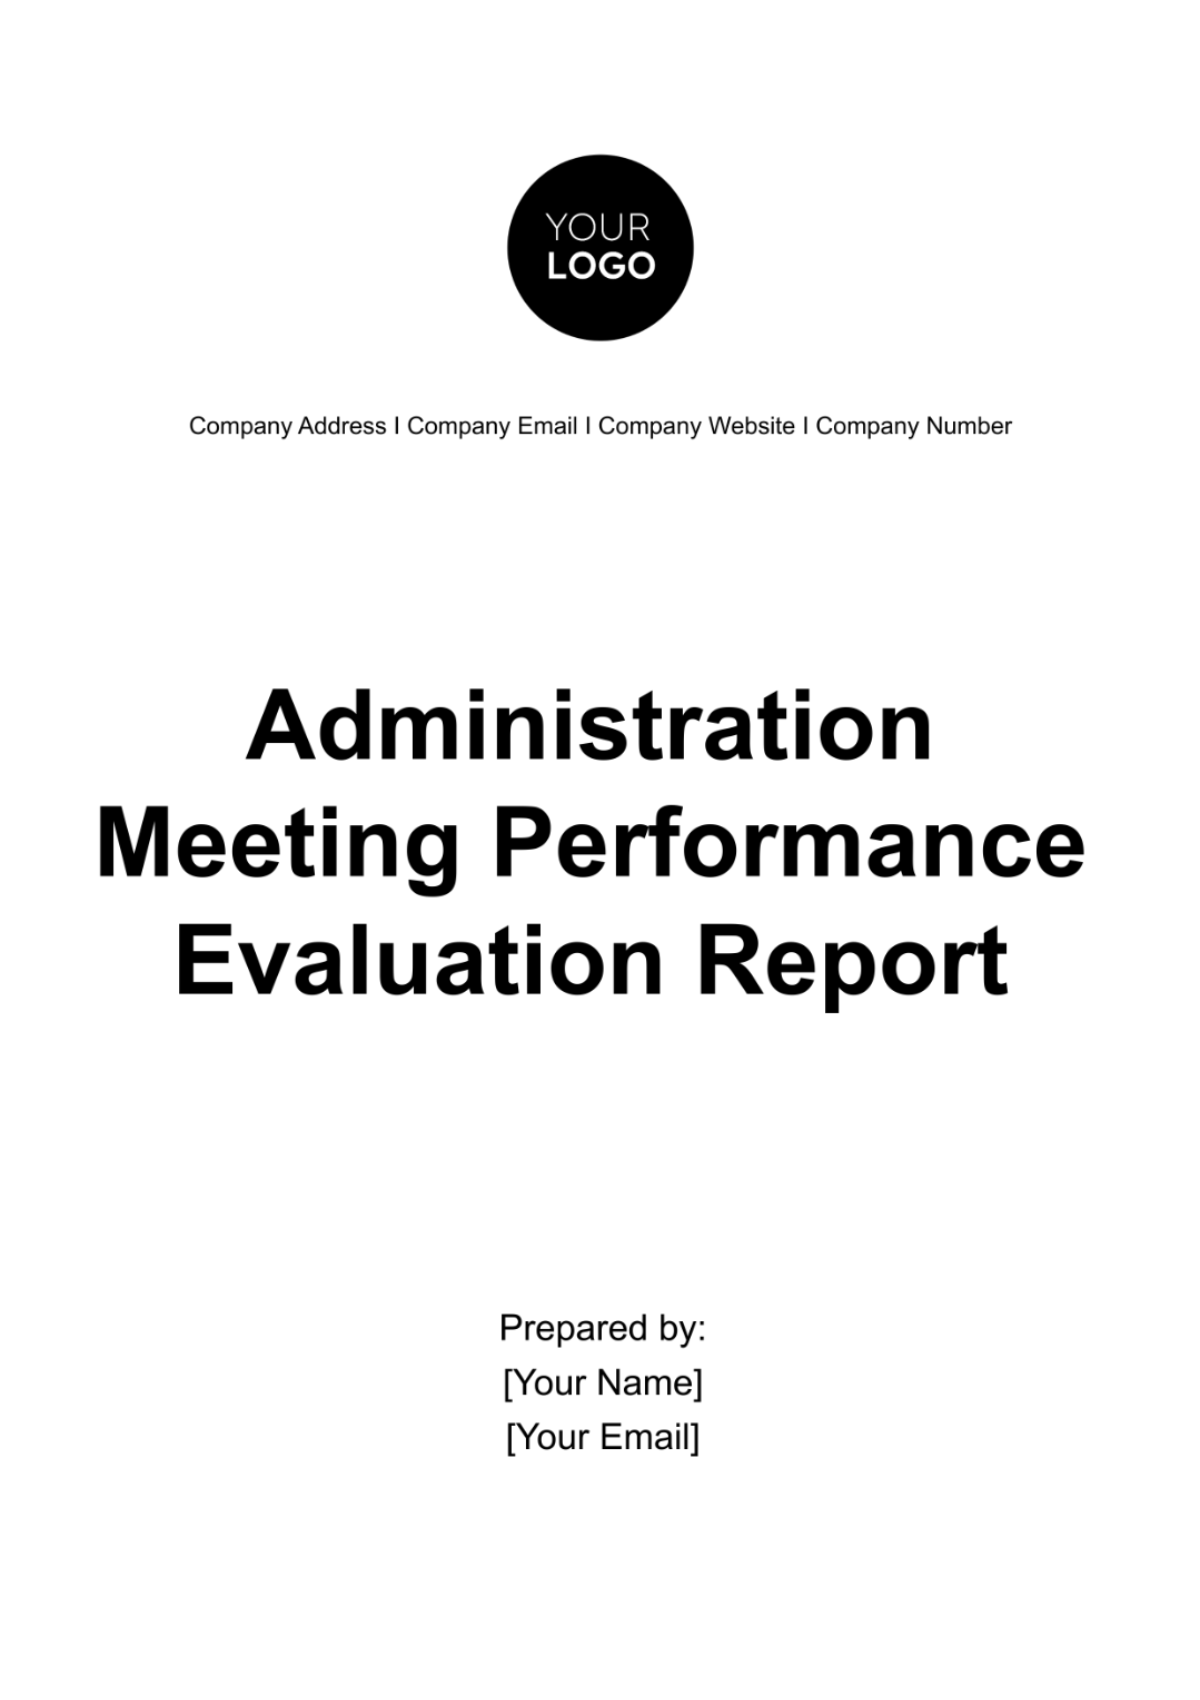 Administration Meeting Performance Evaluation Report Template